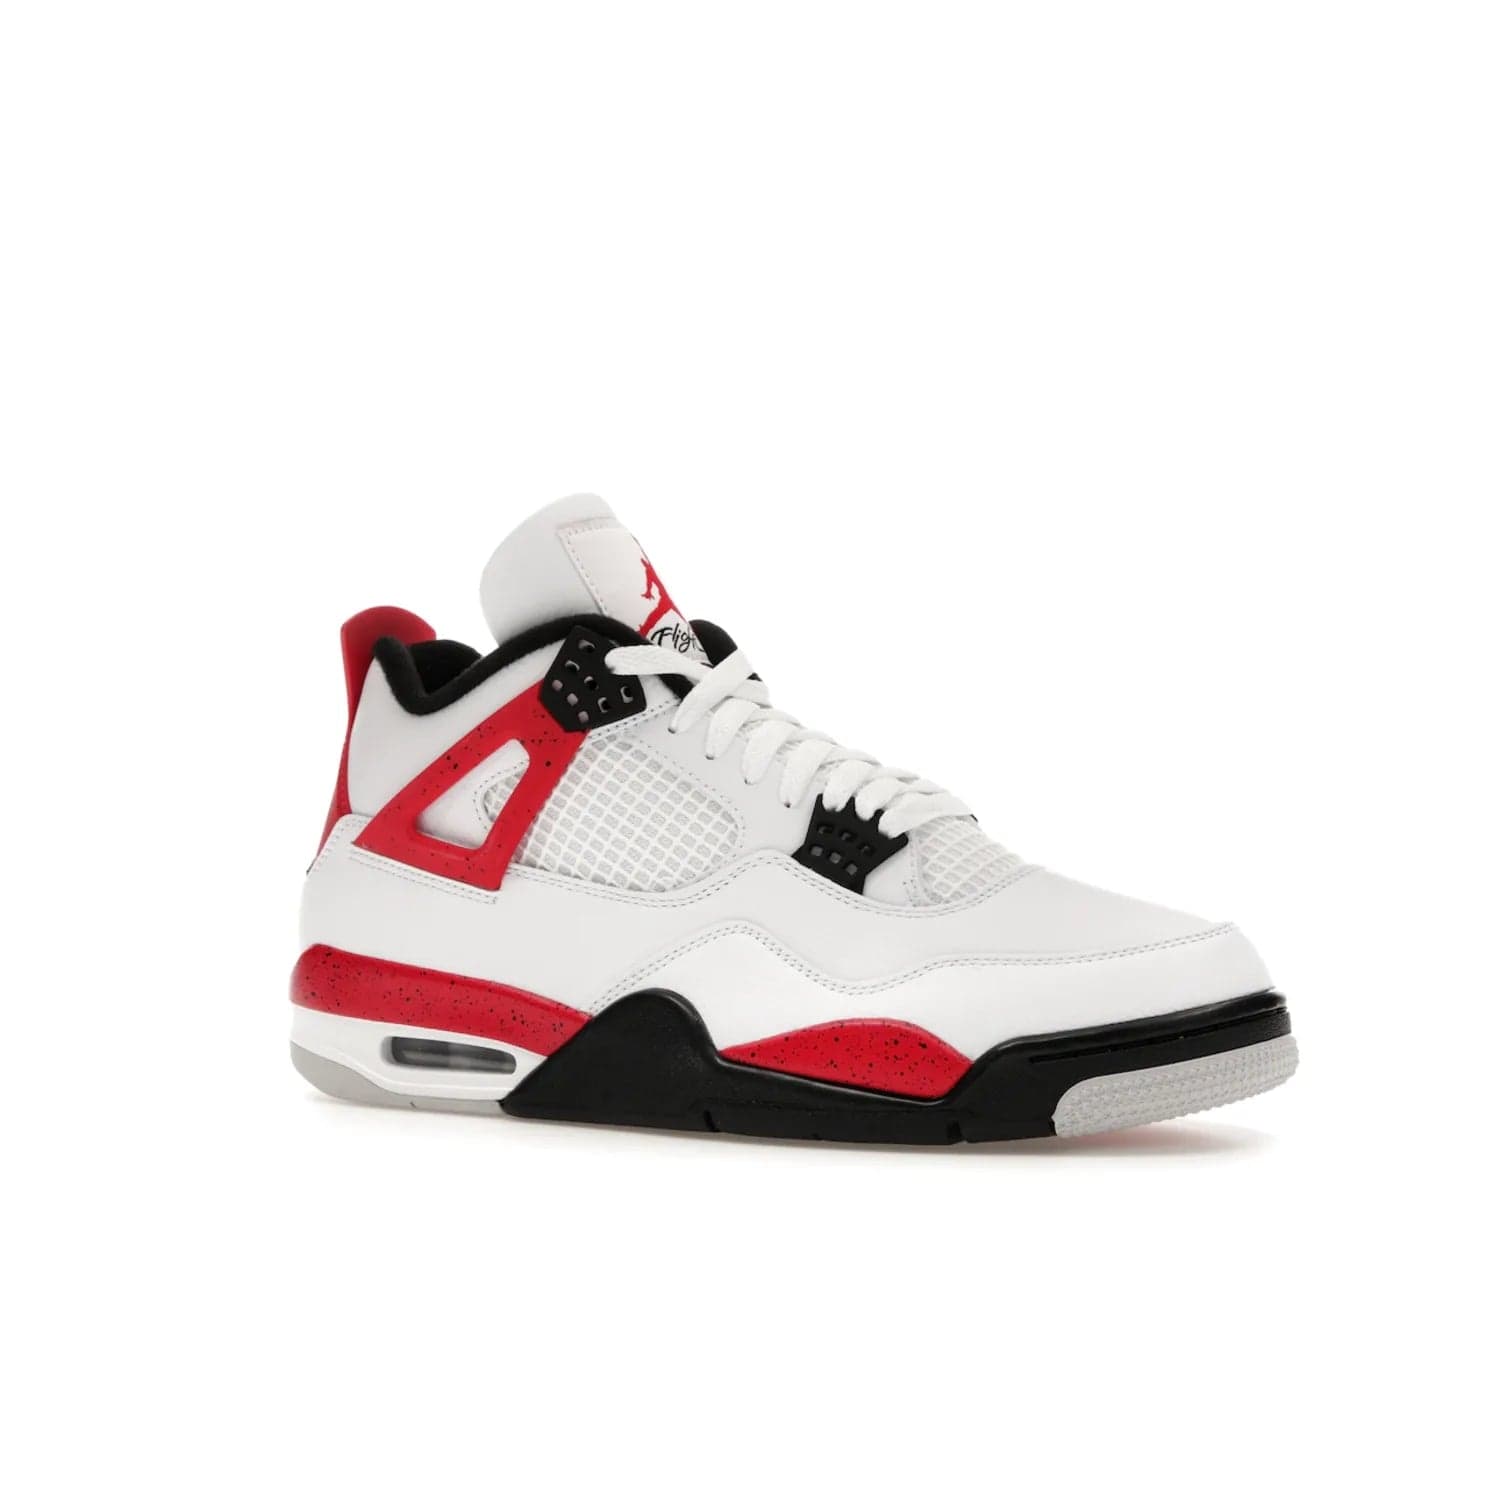 Jordan 4 Retro Red Cement - Image 4 - Only at www.BallersClubKickz.com - Iconic Jordan silhouette with a unique twist. White premium leather uppers with fire red and black detailing. Black, white, and fire red midsole with mesh detailing and Jumpman logo. Jordan 4 Retro Red Cement released with premium price.